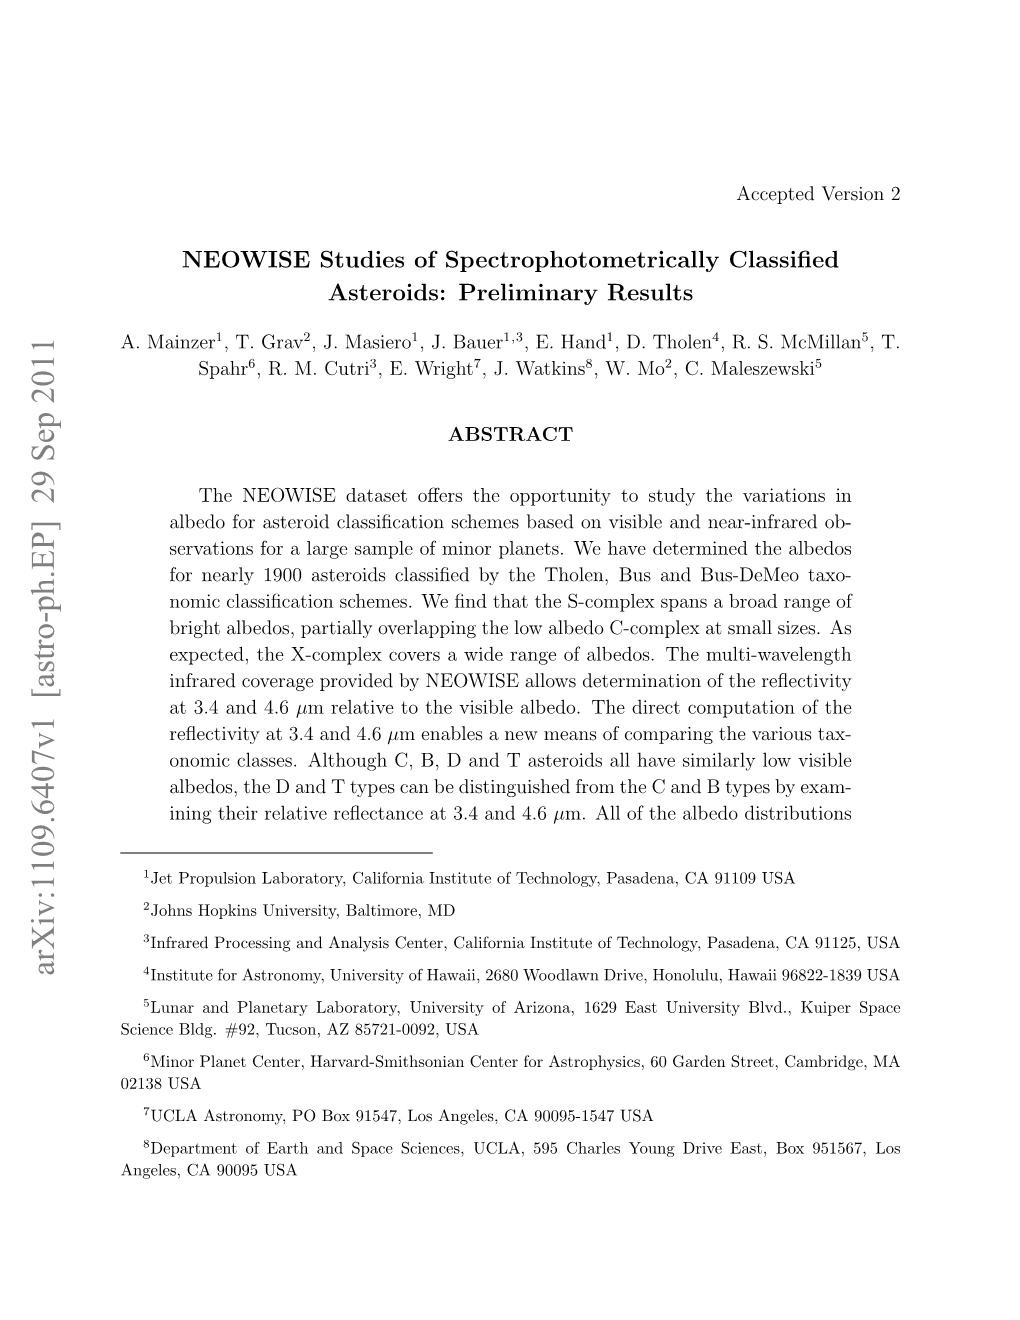 NEOWISE Studies of Spectrophotometrically Classified Asteroids: Preliminary Results